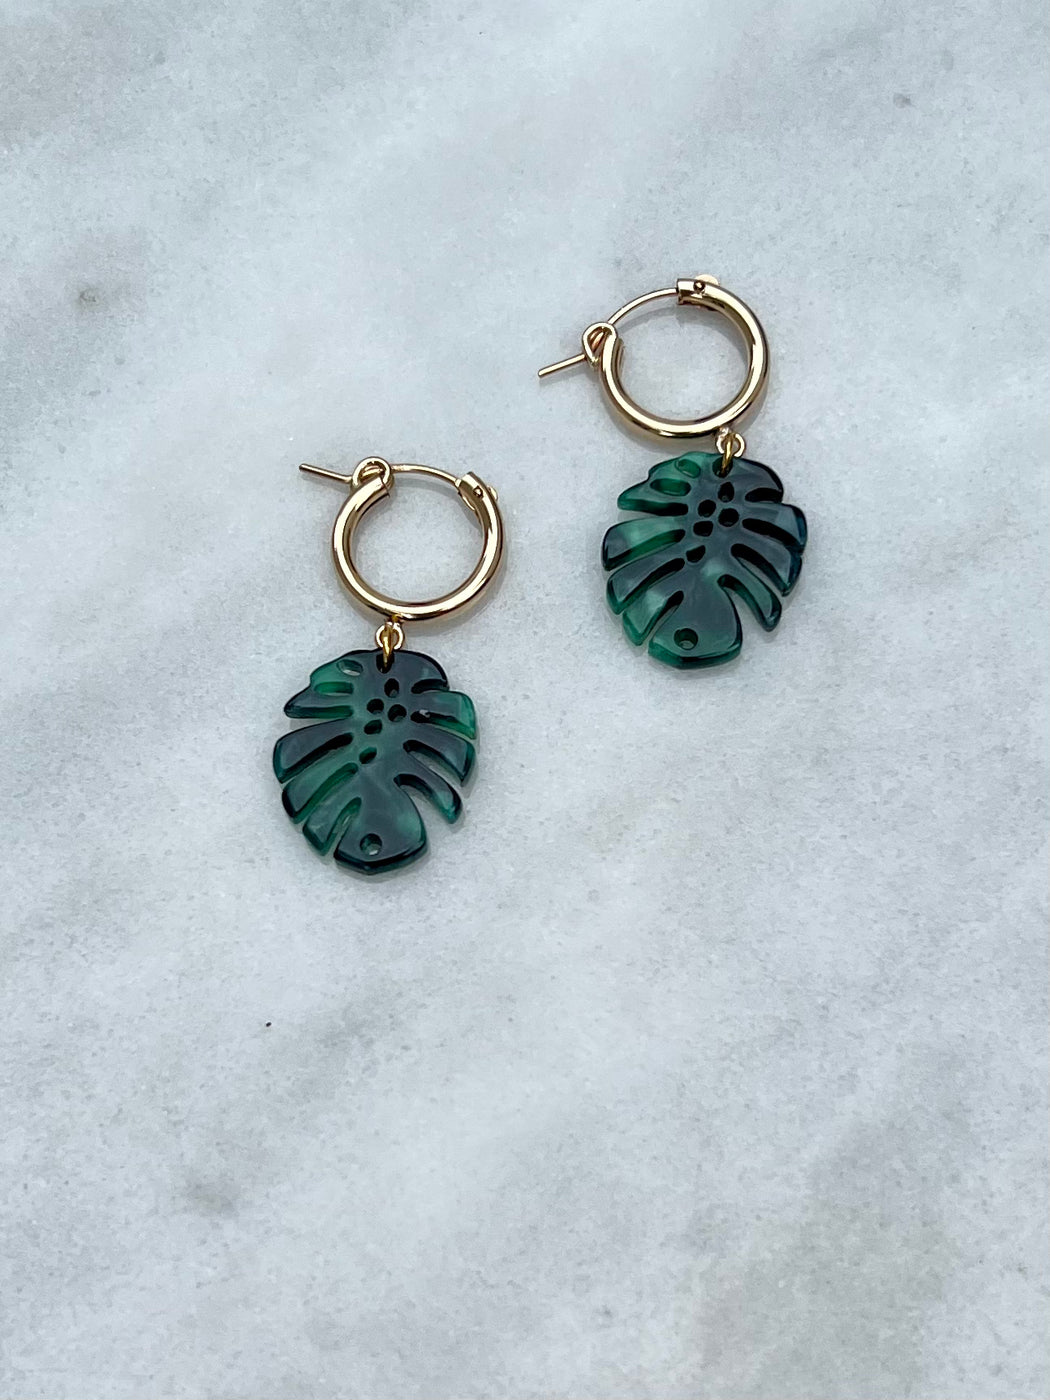 The Elegant Plant Lady Earrings   Light 15 x 22 mm 14k gold fill hoops with green acrylic monstera leaves. by PUNKWASP